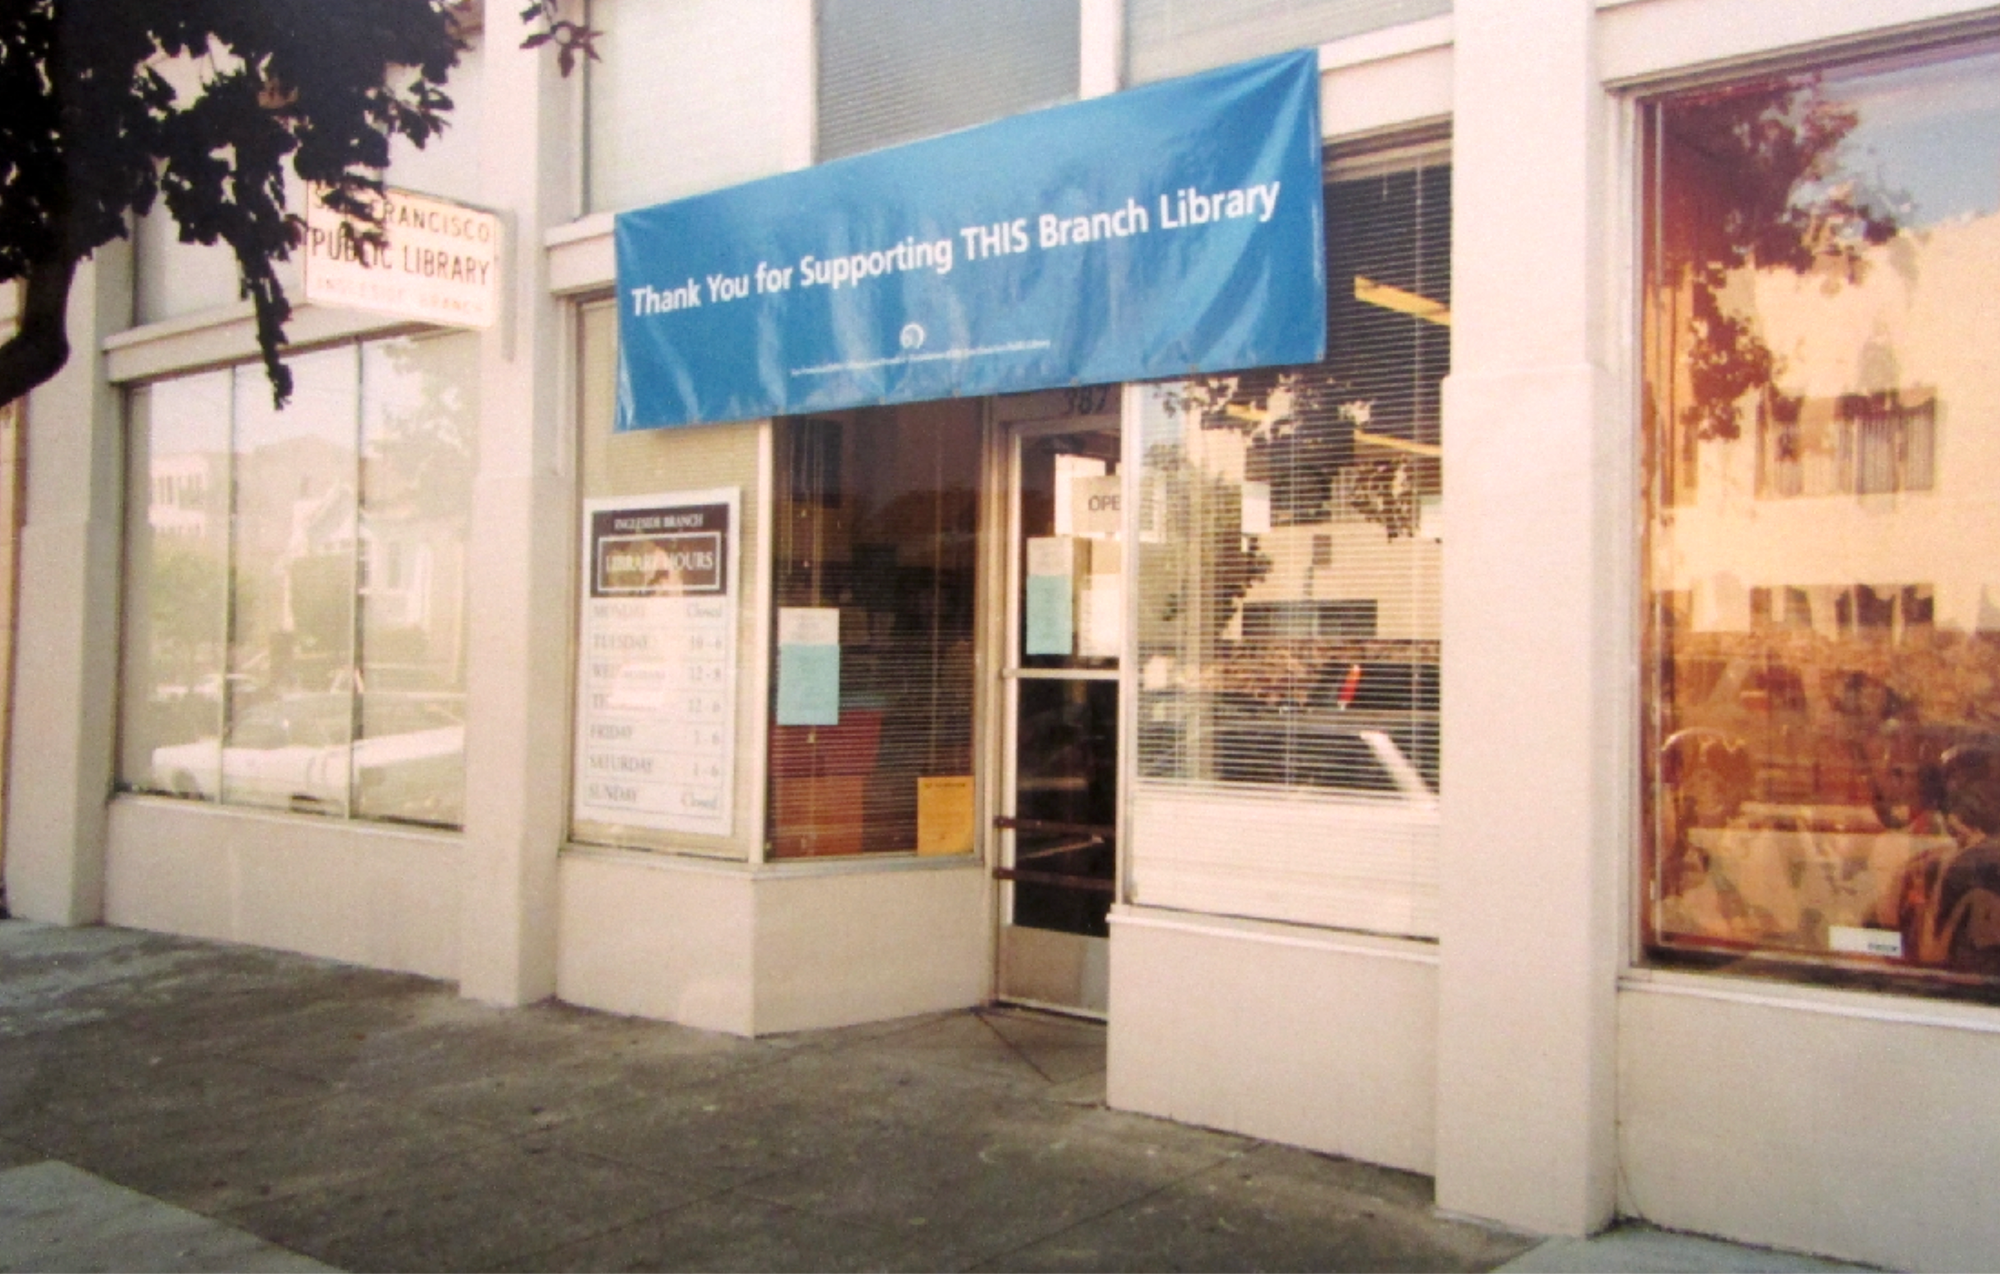 Building facade with a sign that reads "Thank You for Supporting THIS Branch Library."